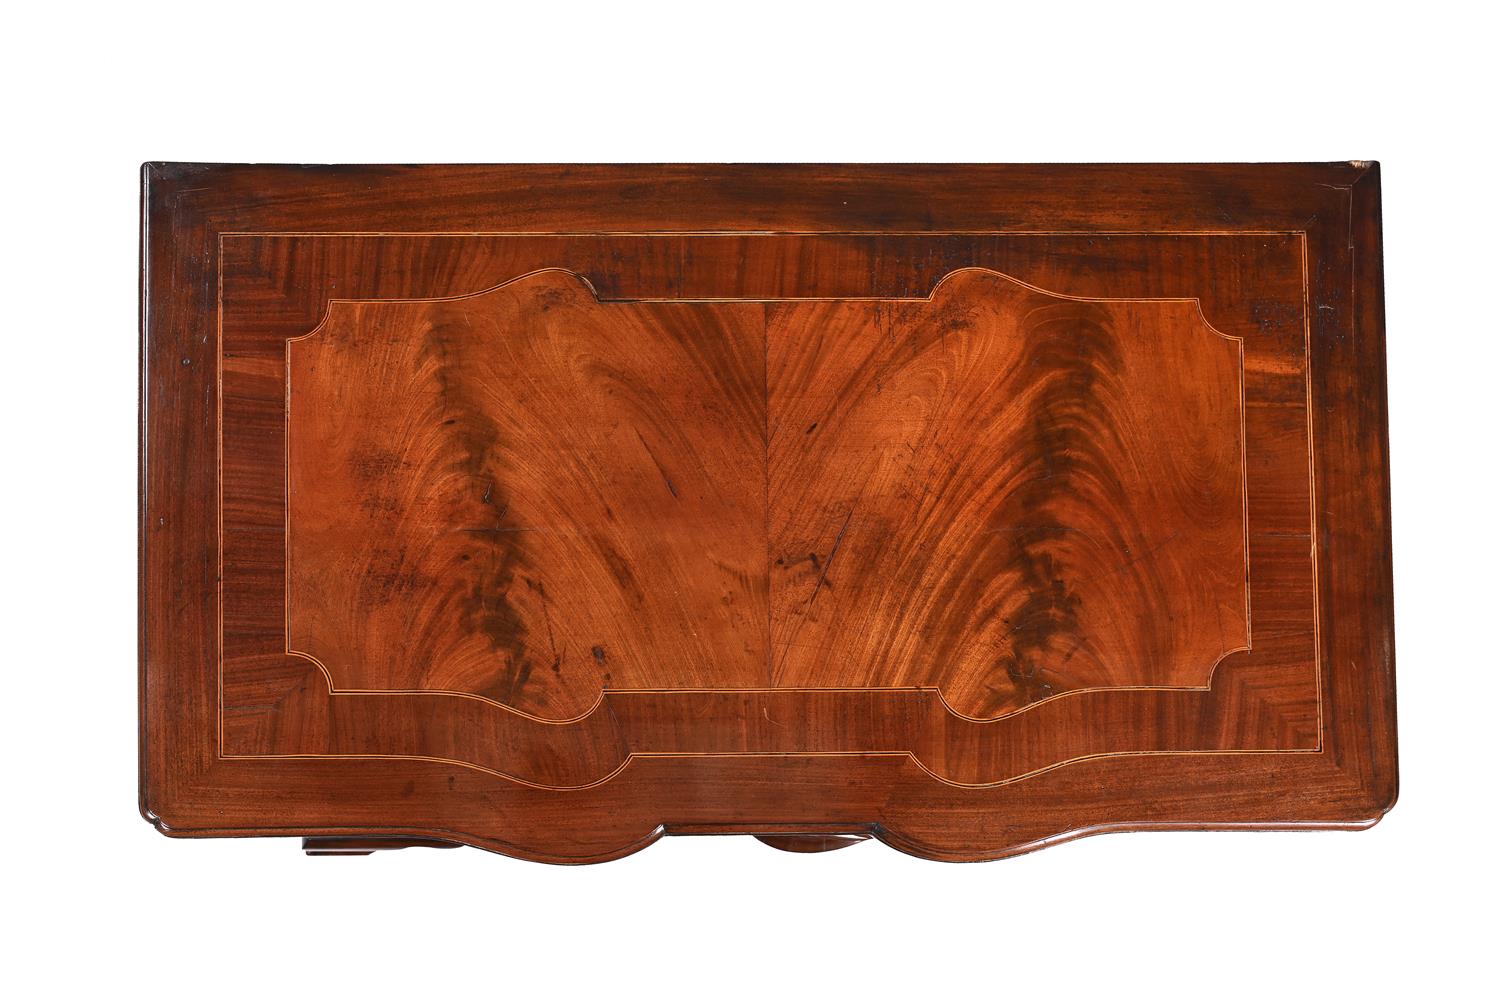 A GEORGE III MAHOGANY CHEST OF DRAWERS, CIRCA 1770 - Image 3 of 3